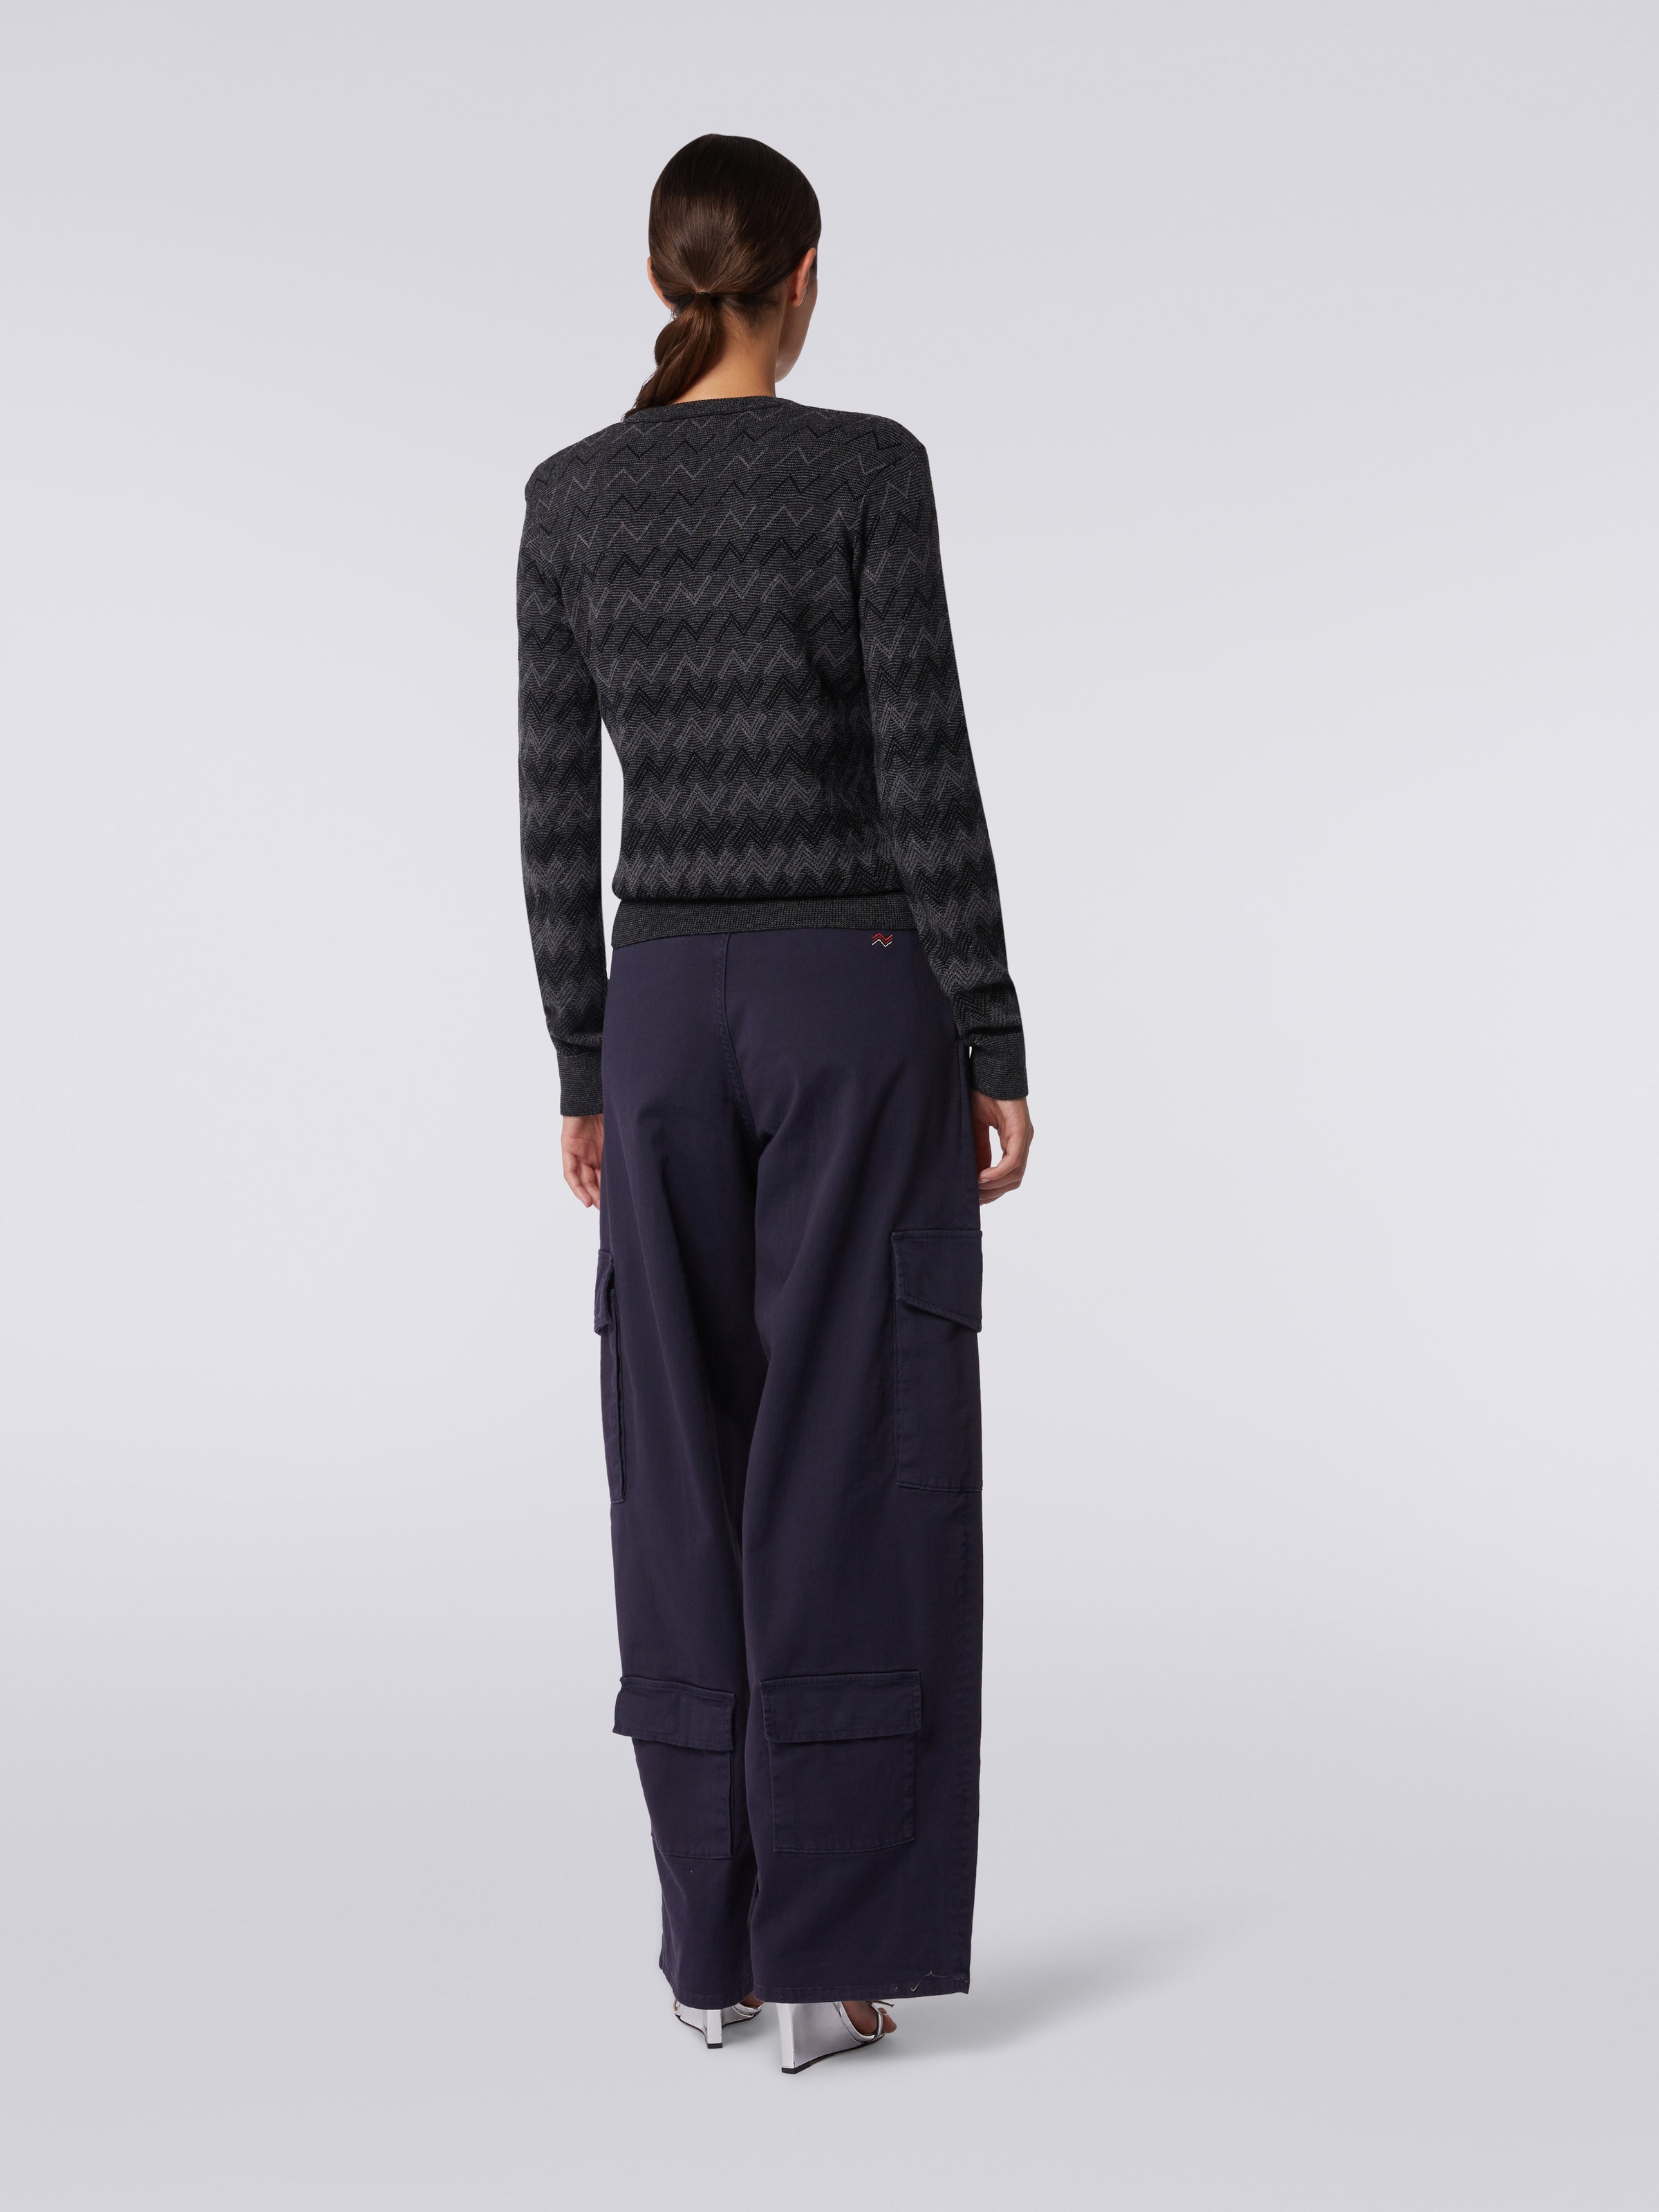 Cashmere V-neck sweater with zigzags, Black    - 3